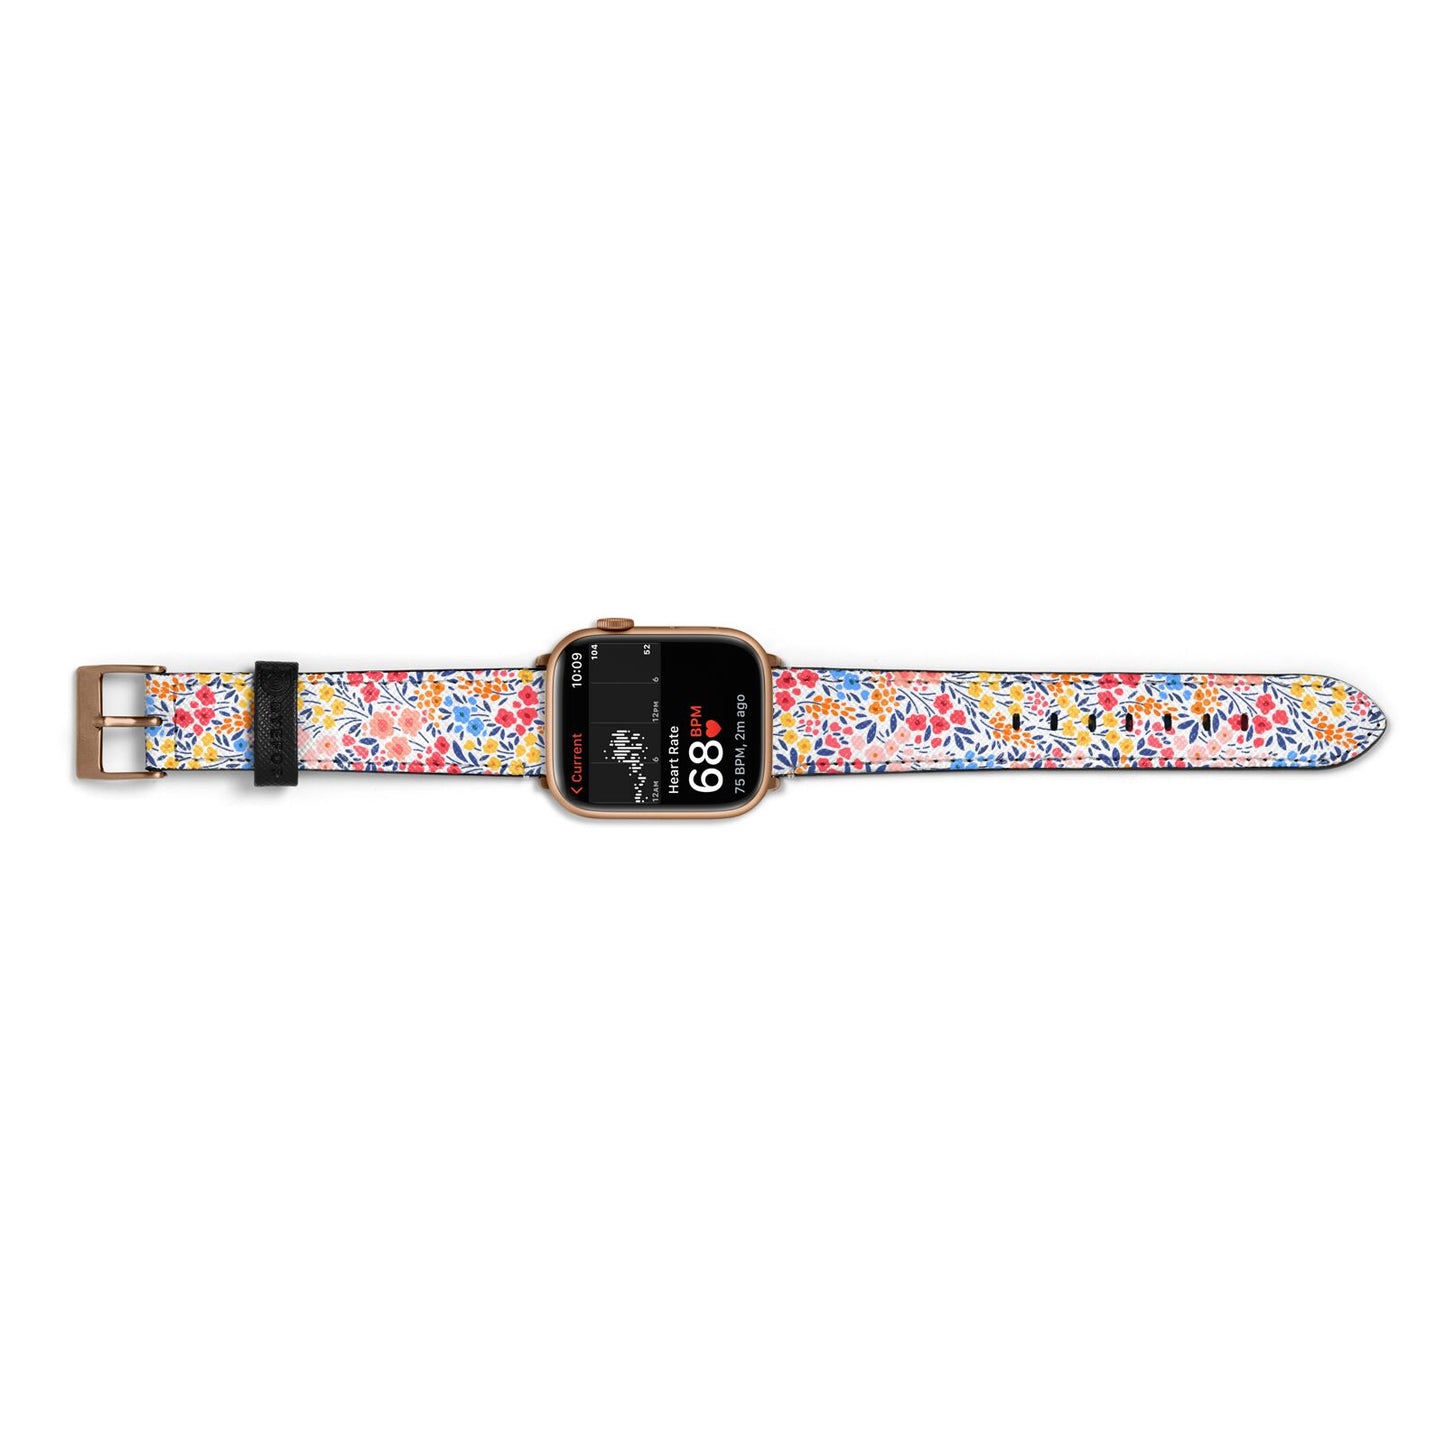 Small Flowers Apple Watch Strap Size 38mm Landscape Image Gold Hardware